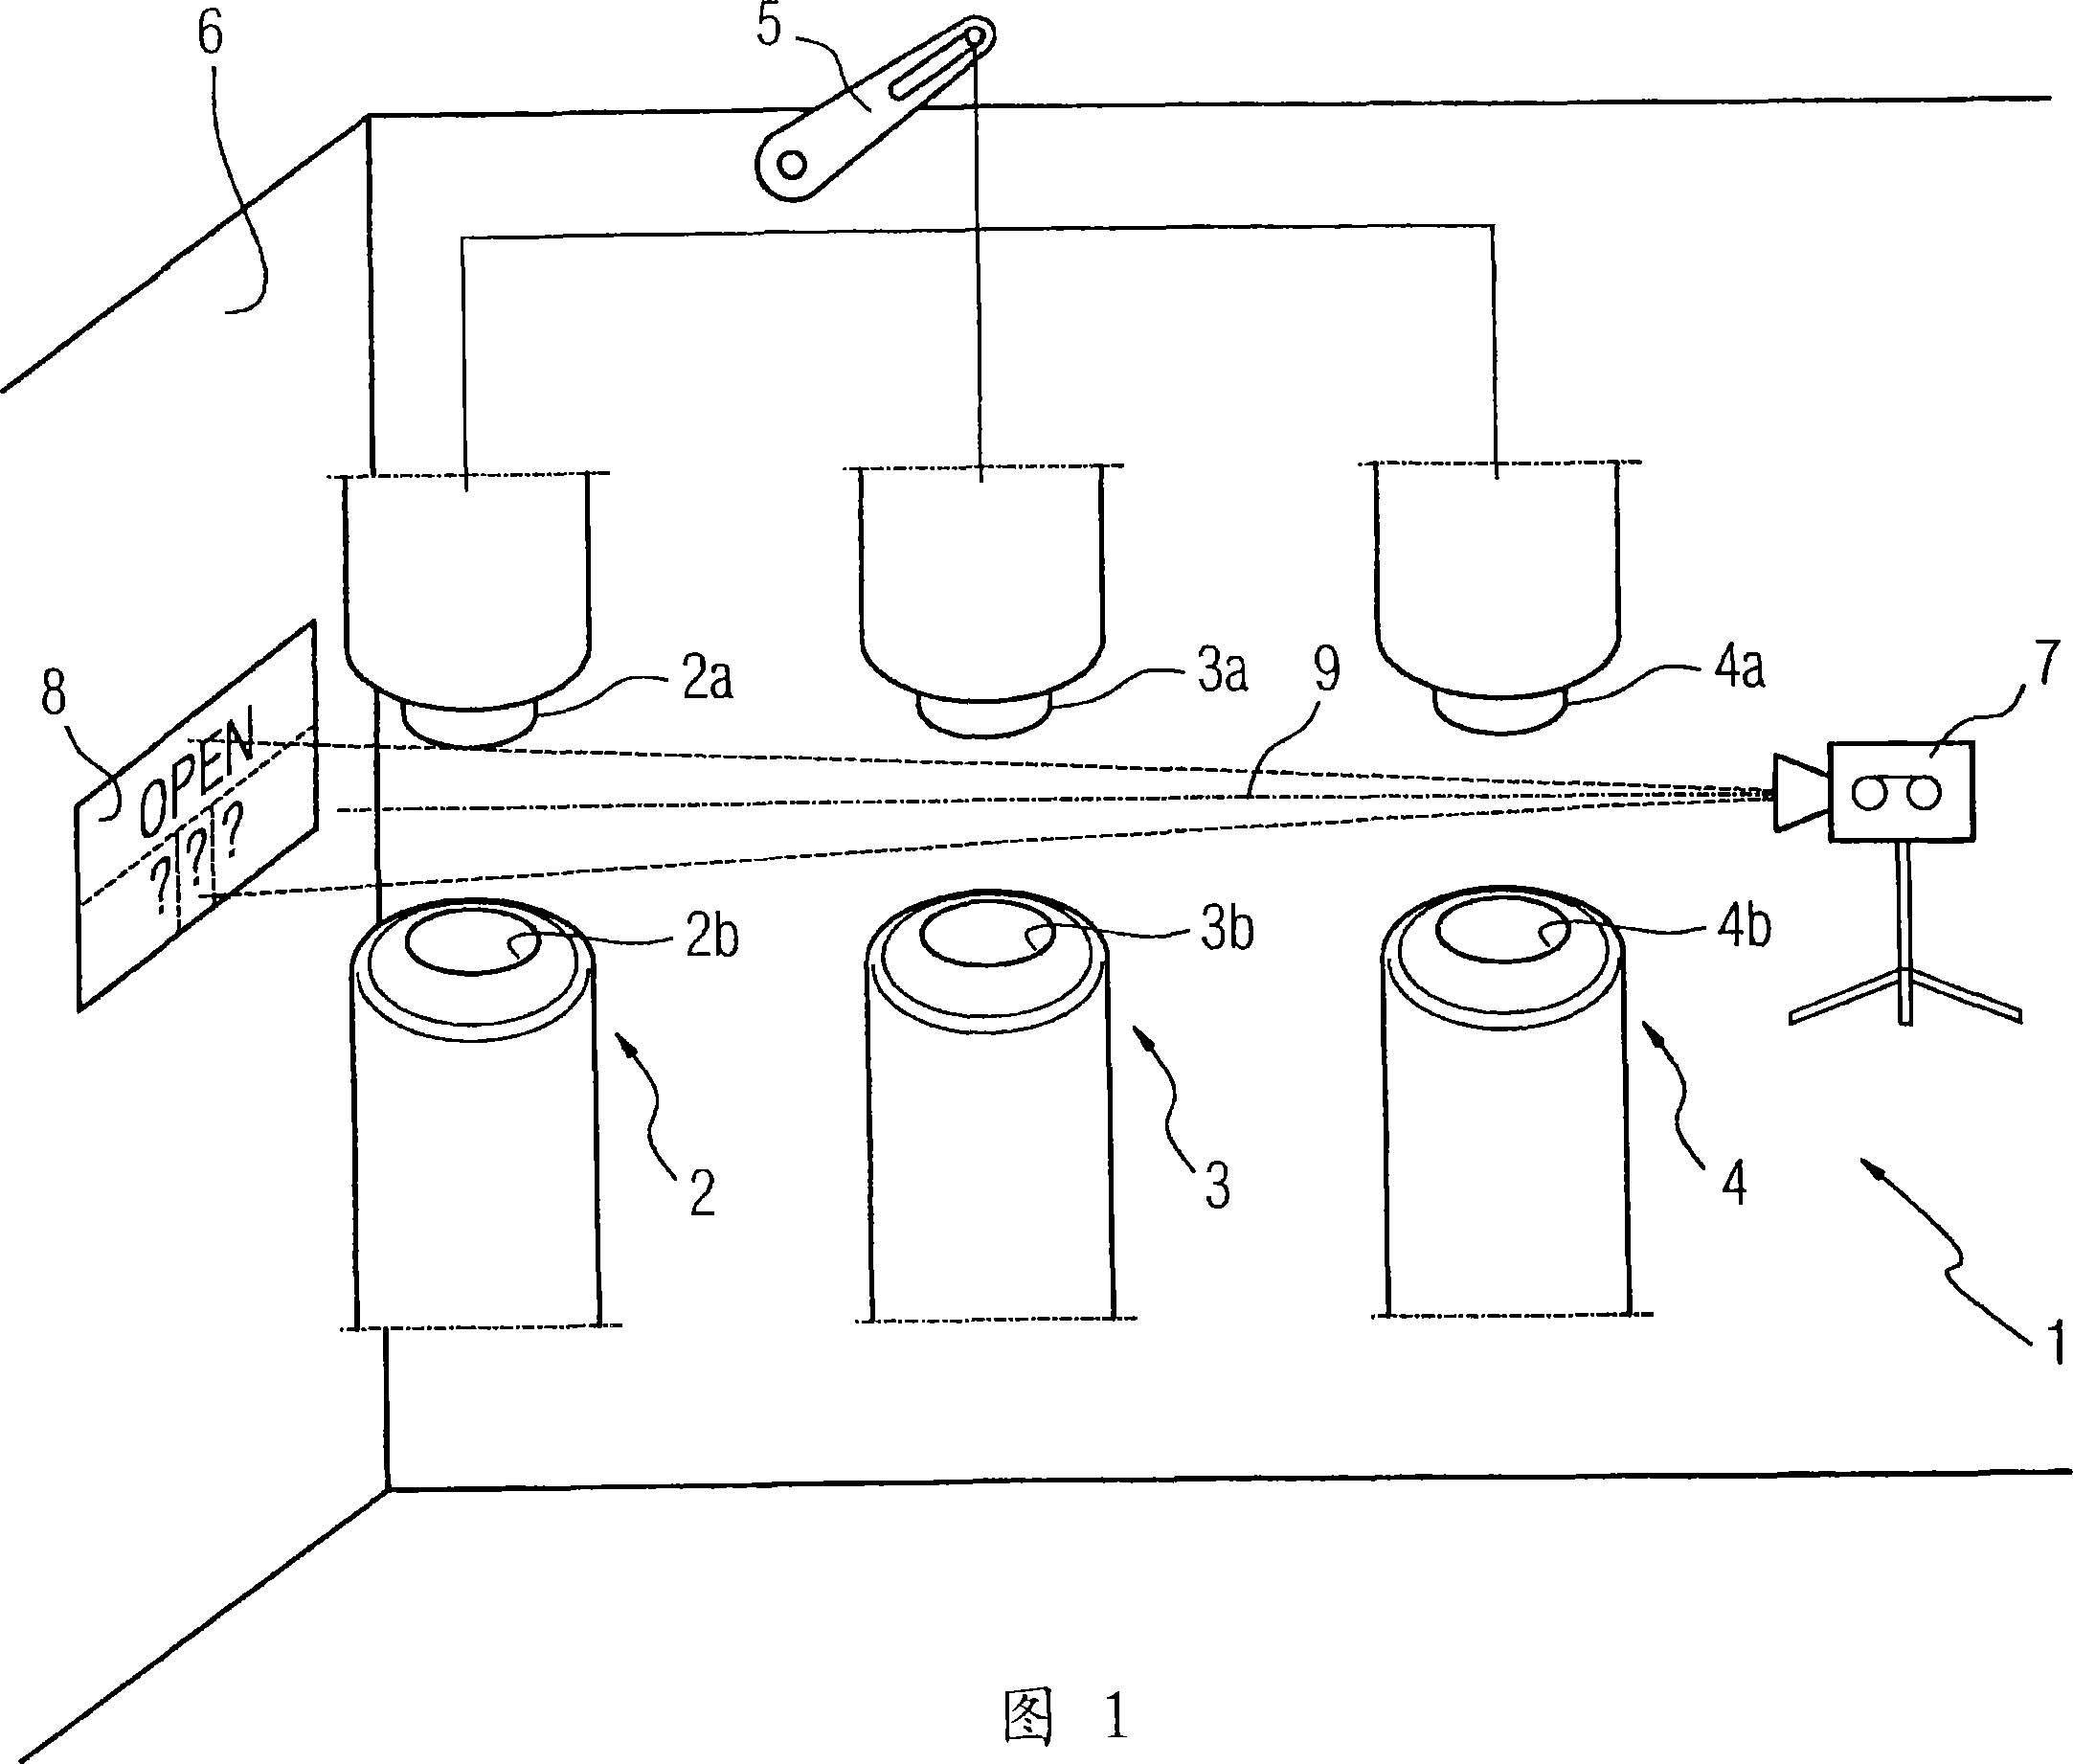 Apparatus for monitoring a state of an electrical switching device